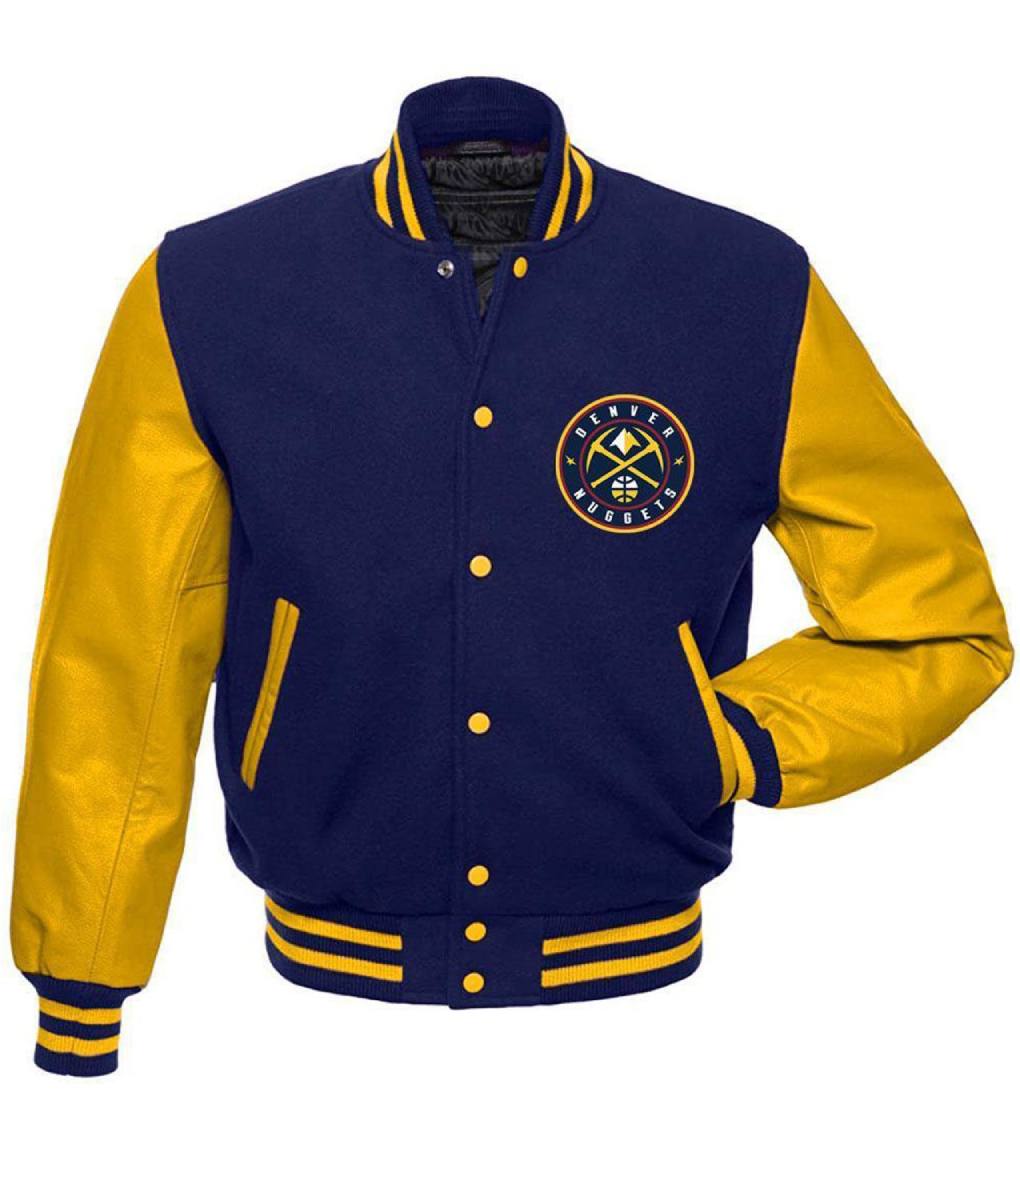 Indiana Pacers Blue and Yellow Jacket (1)